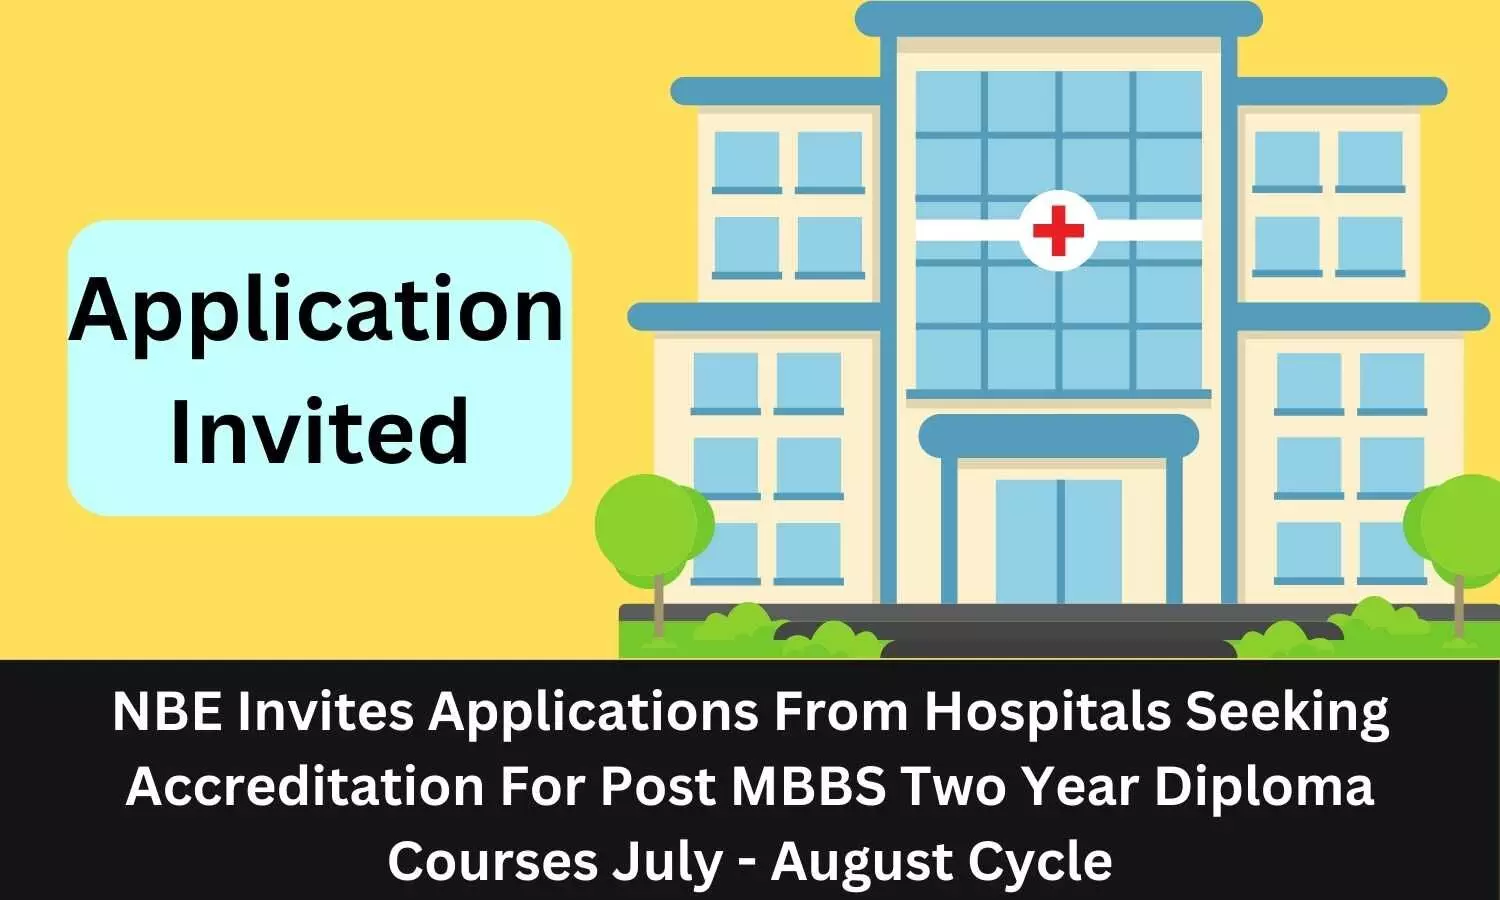 Applications invited from hospitals seeking accreditation with NBEMS for post MBBS two year diploma courses July - August cycle